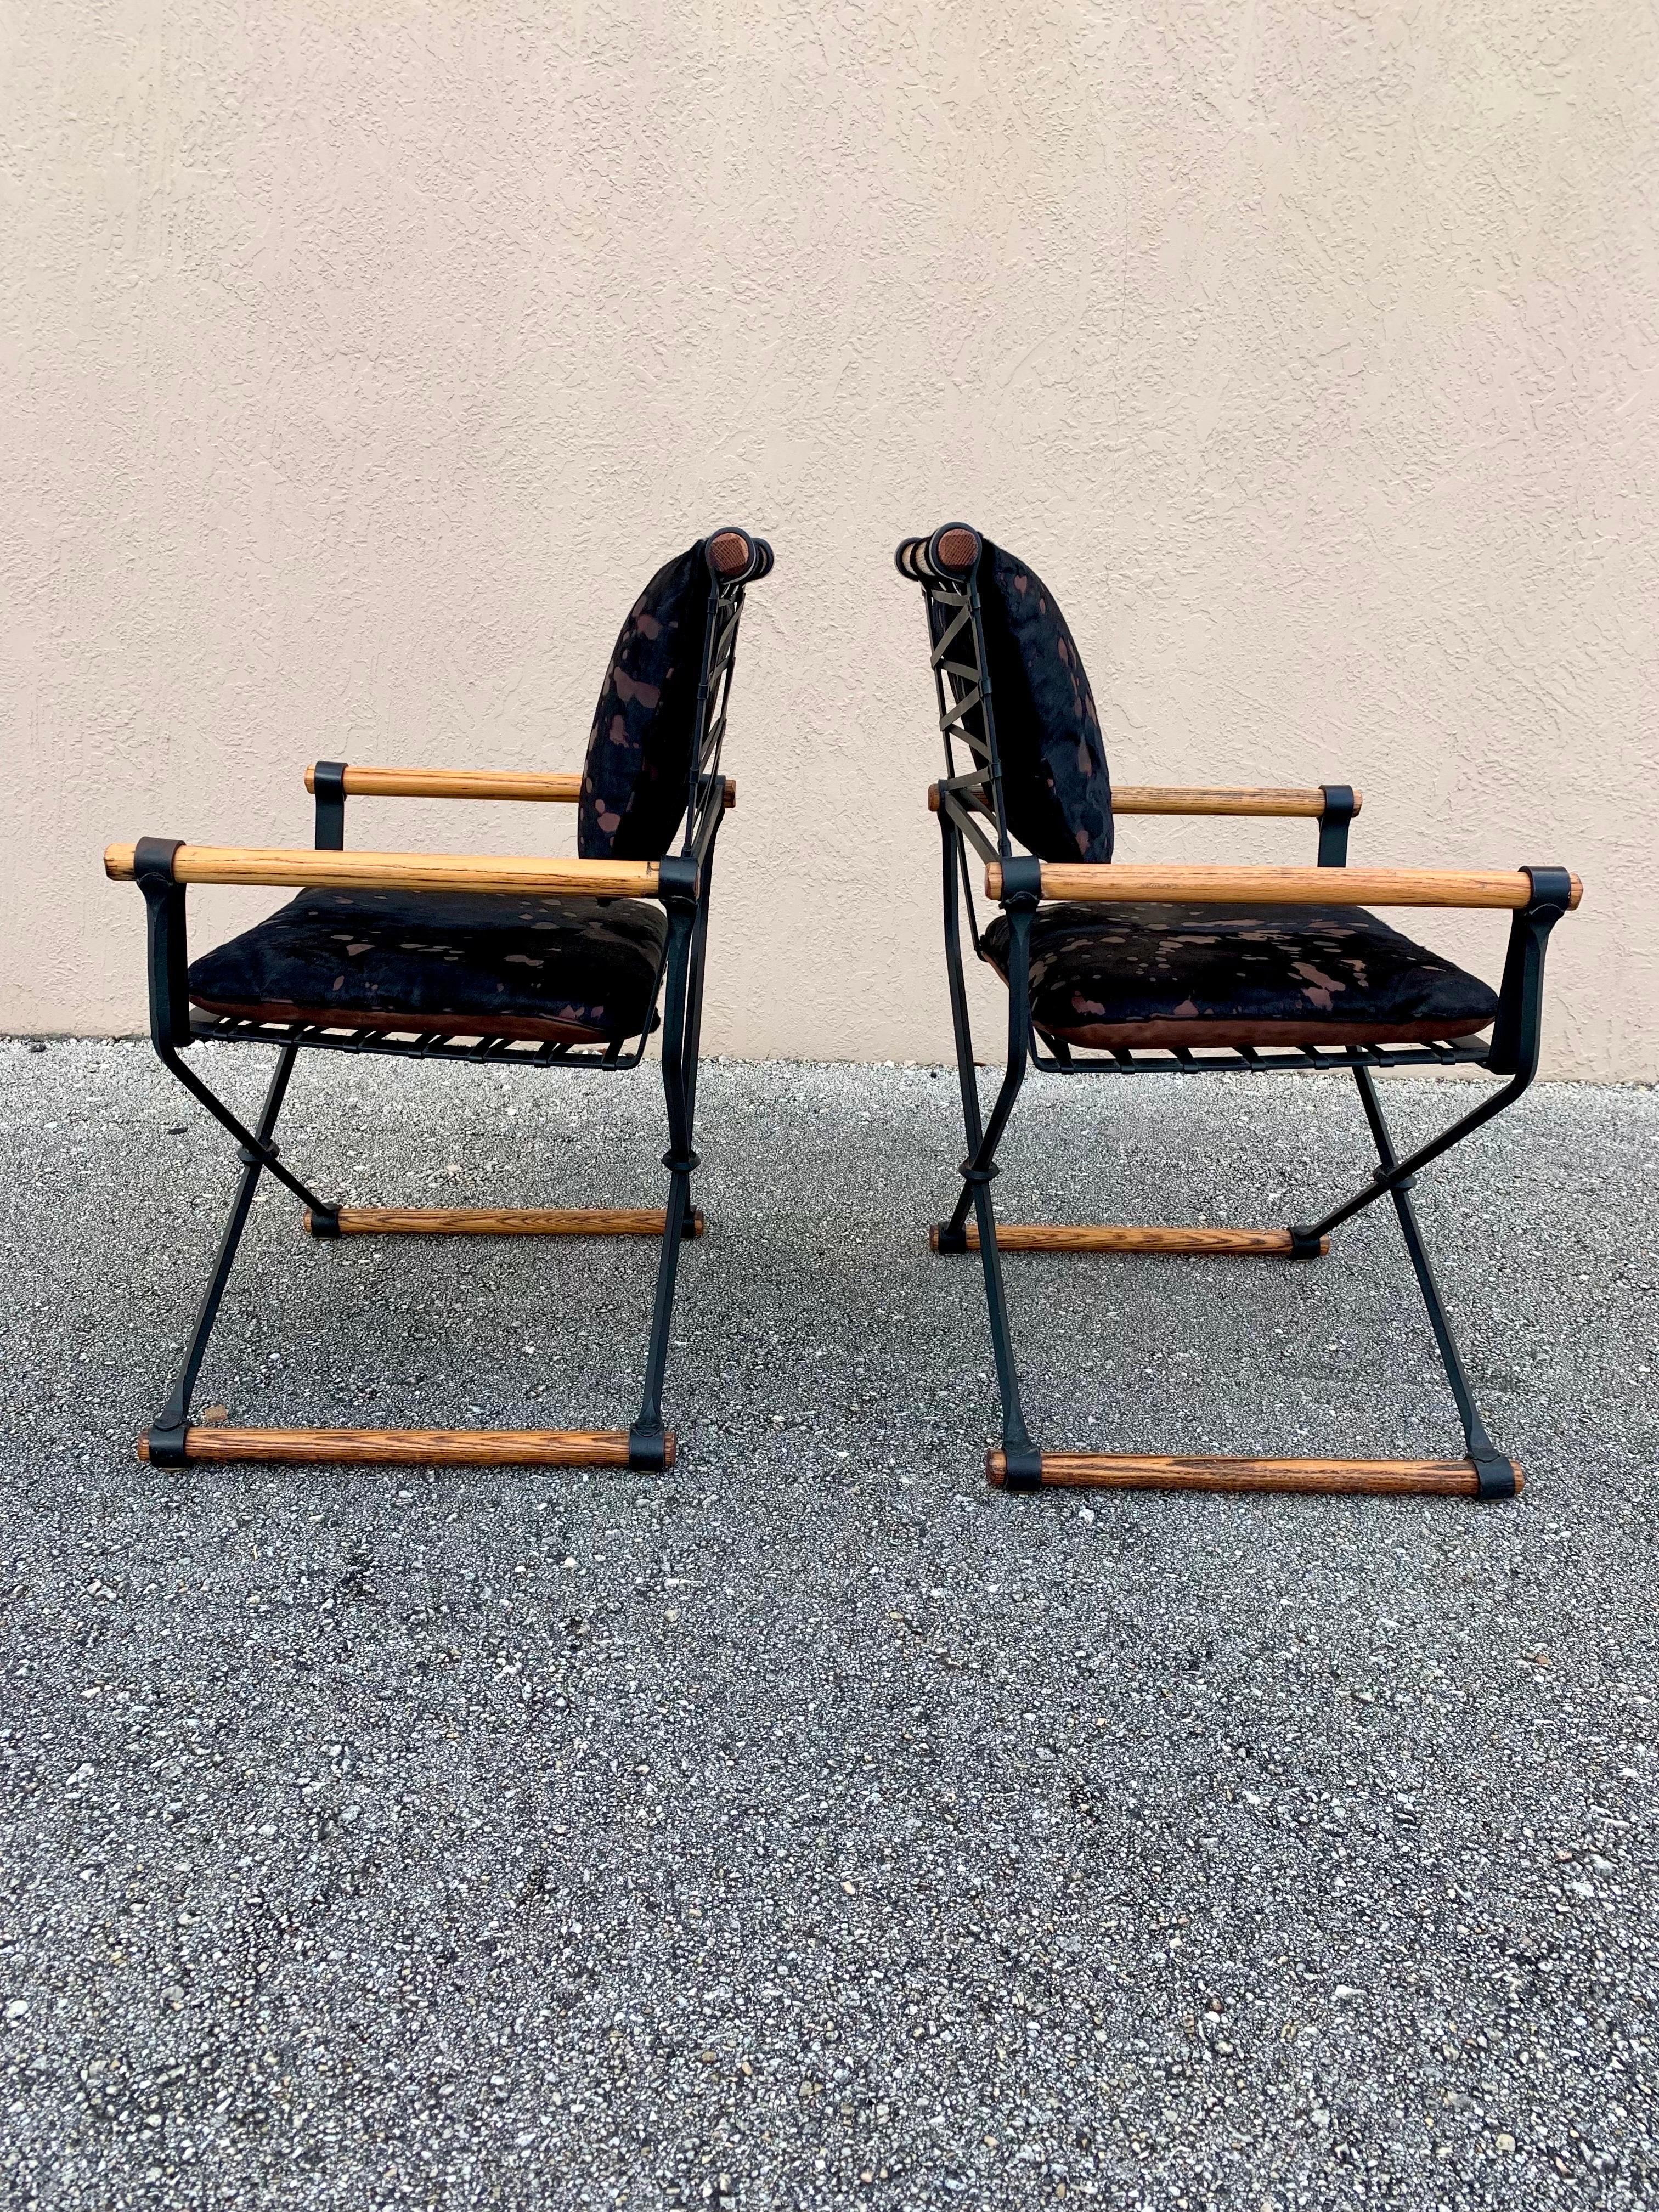 20th Century Pair of Chairs by Cleo Baldon for Terra Furniture, Hide on Upholstery For Sale